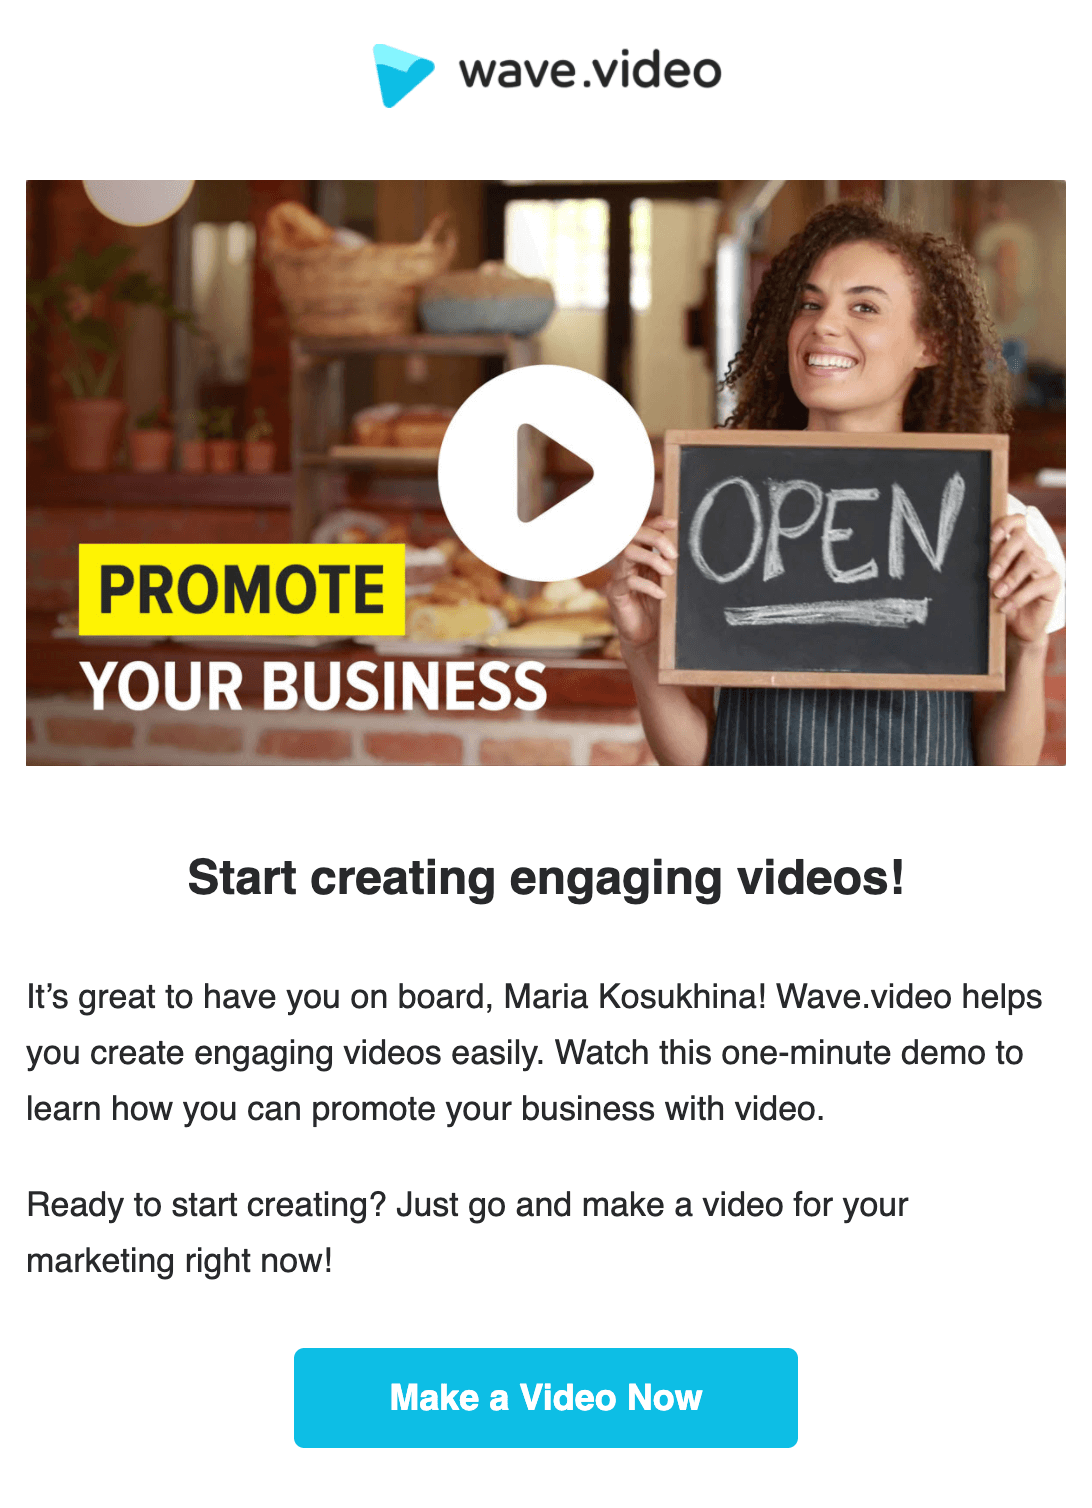 Static image with play button in email